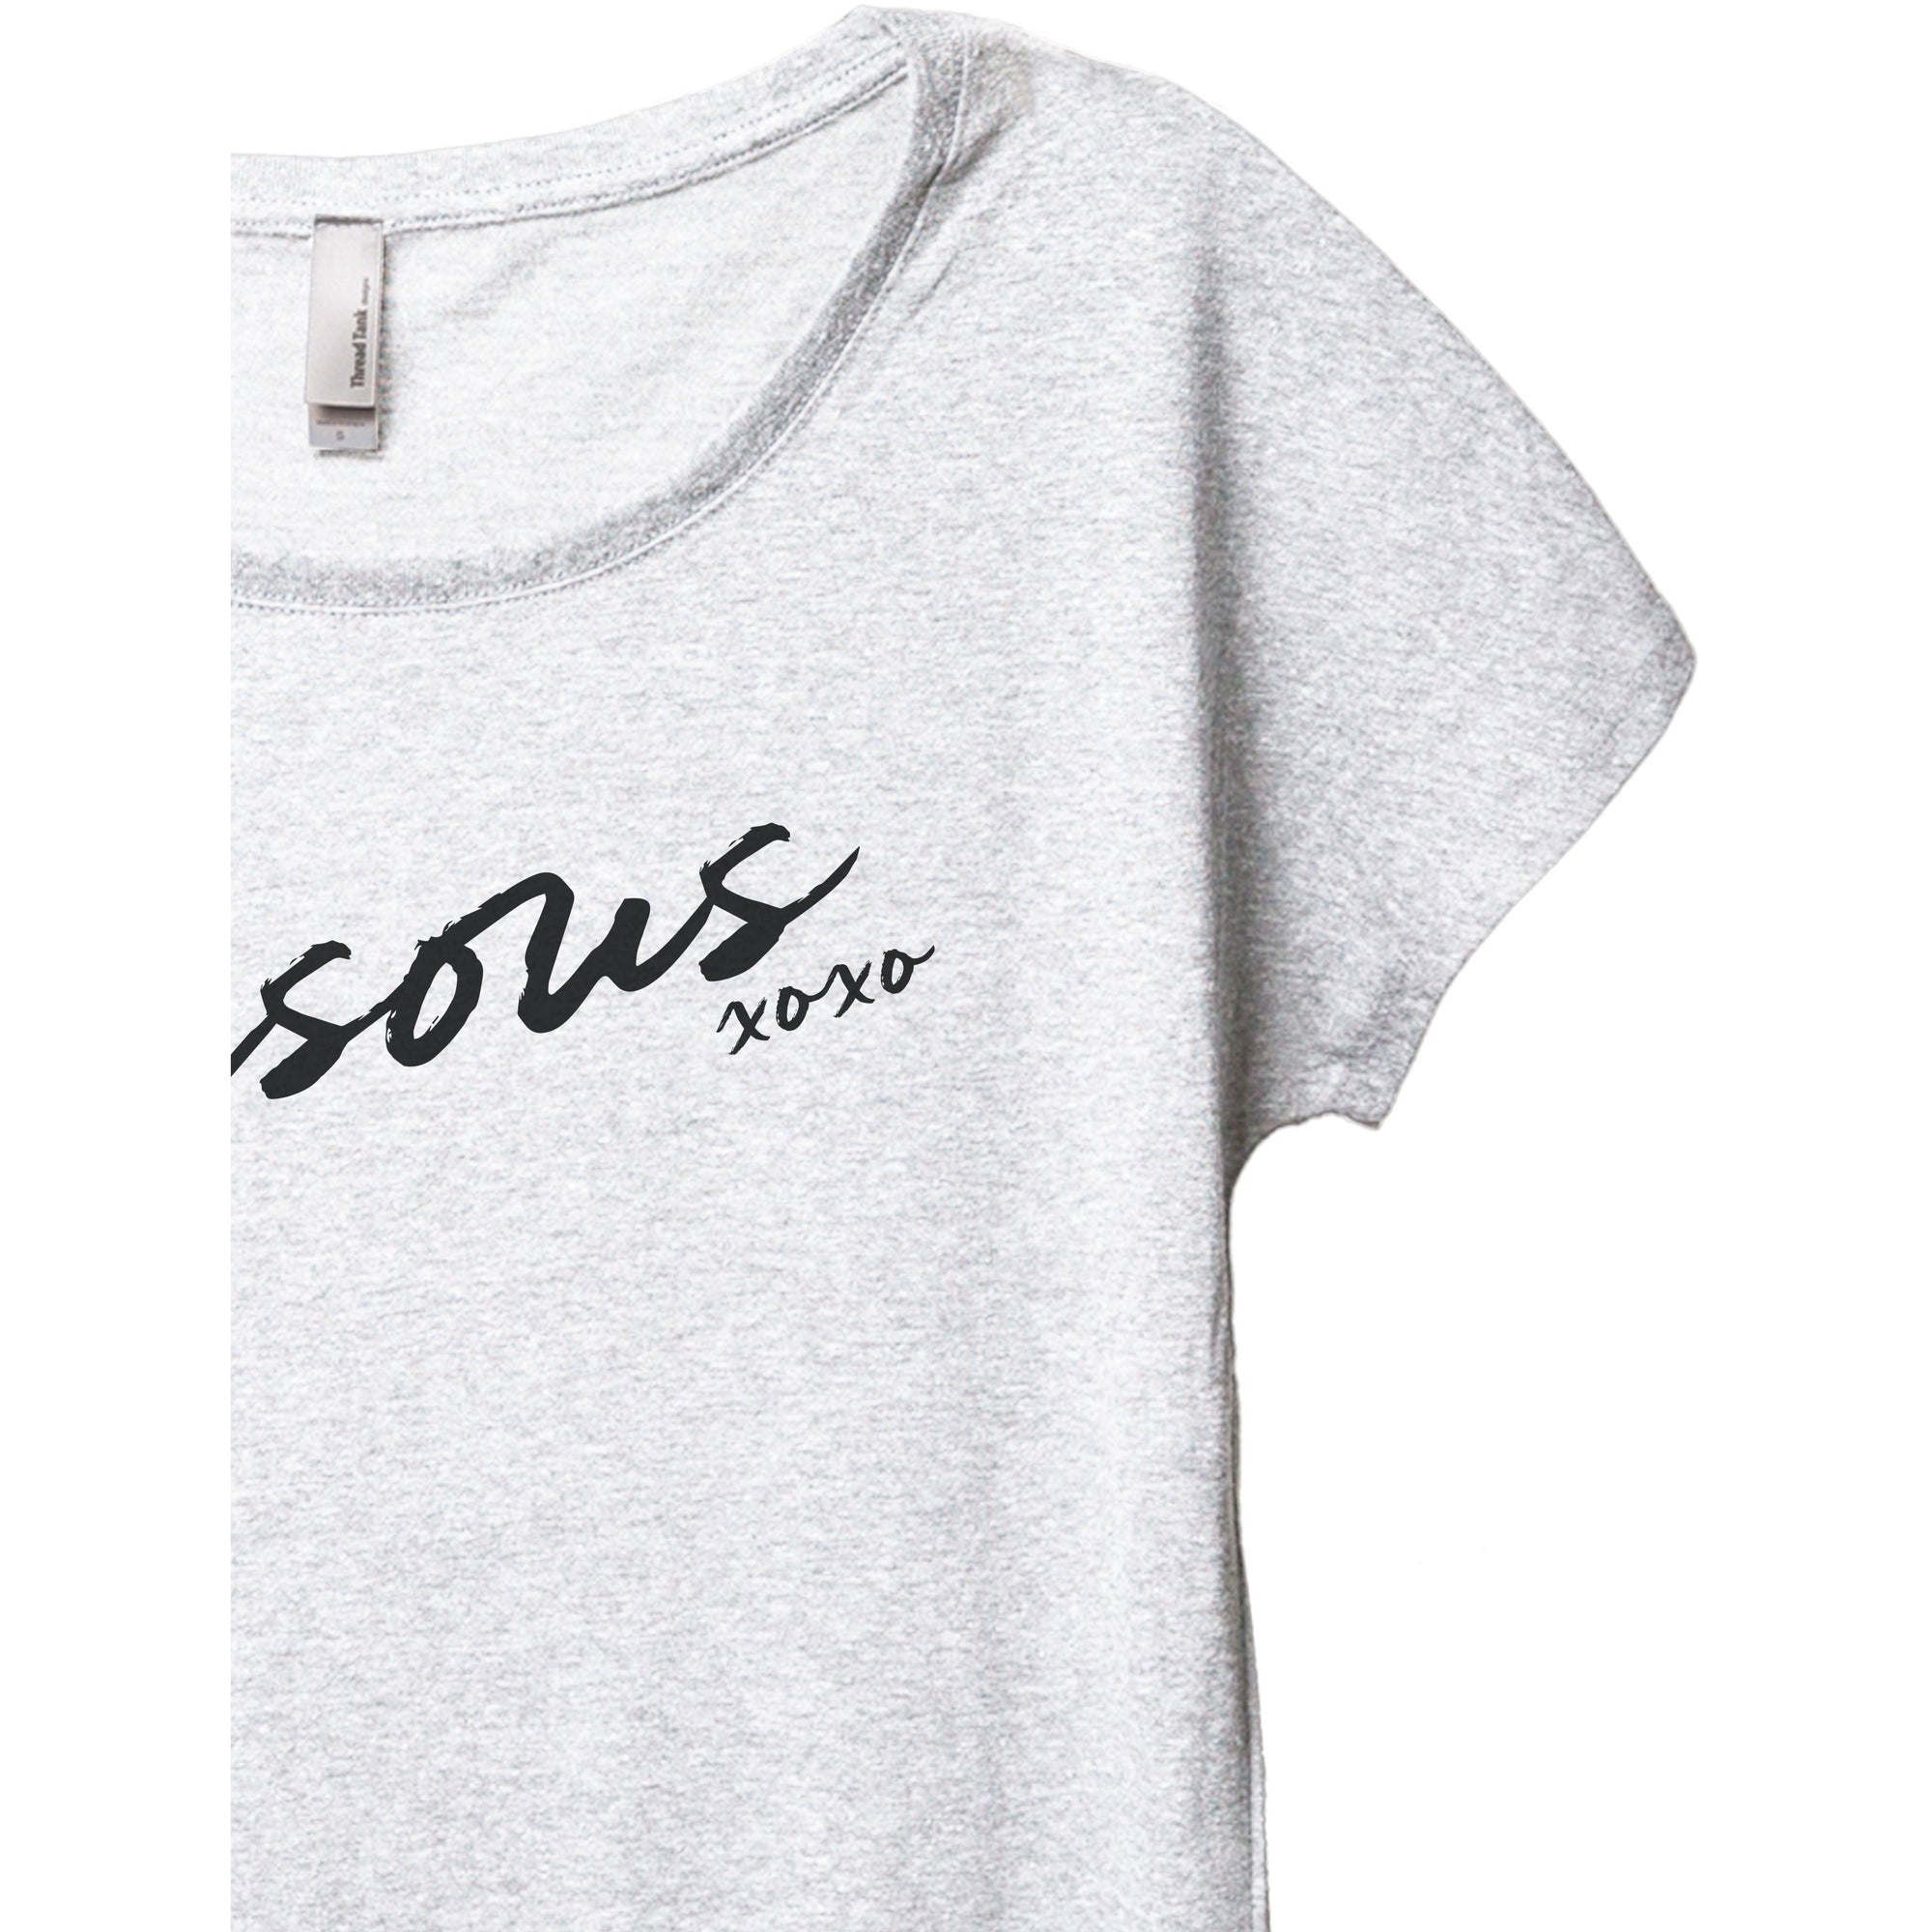 Bisous XOXO Women's Relaxed Slouchy Dolman T-Shirt Tee Heather White